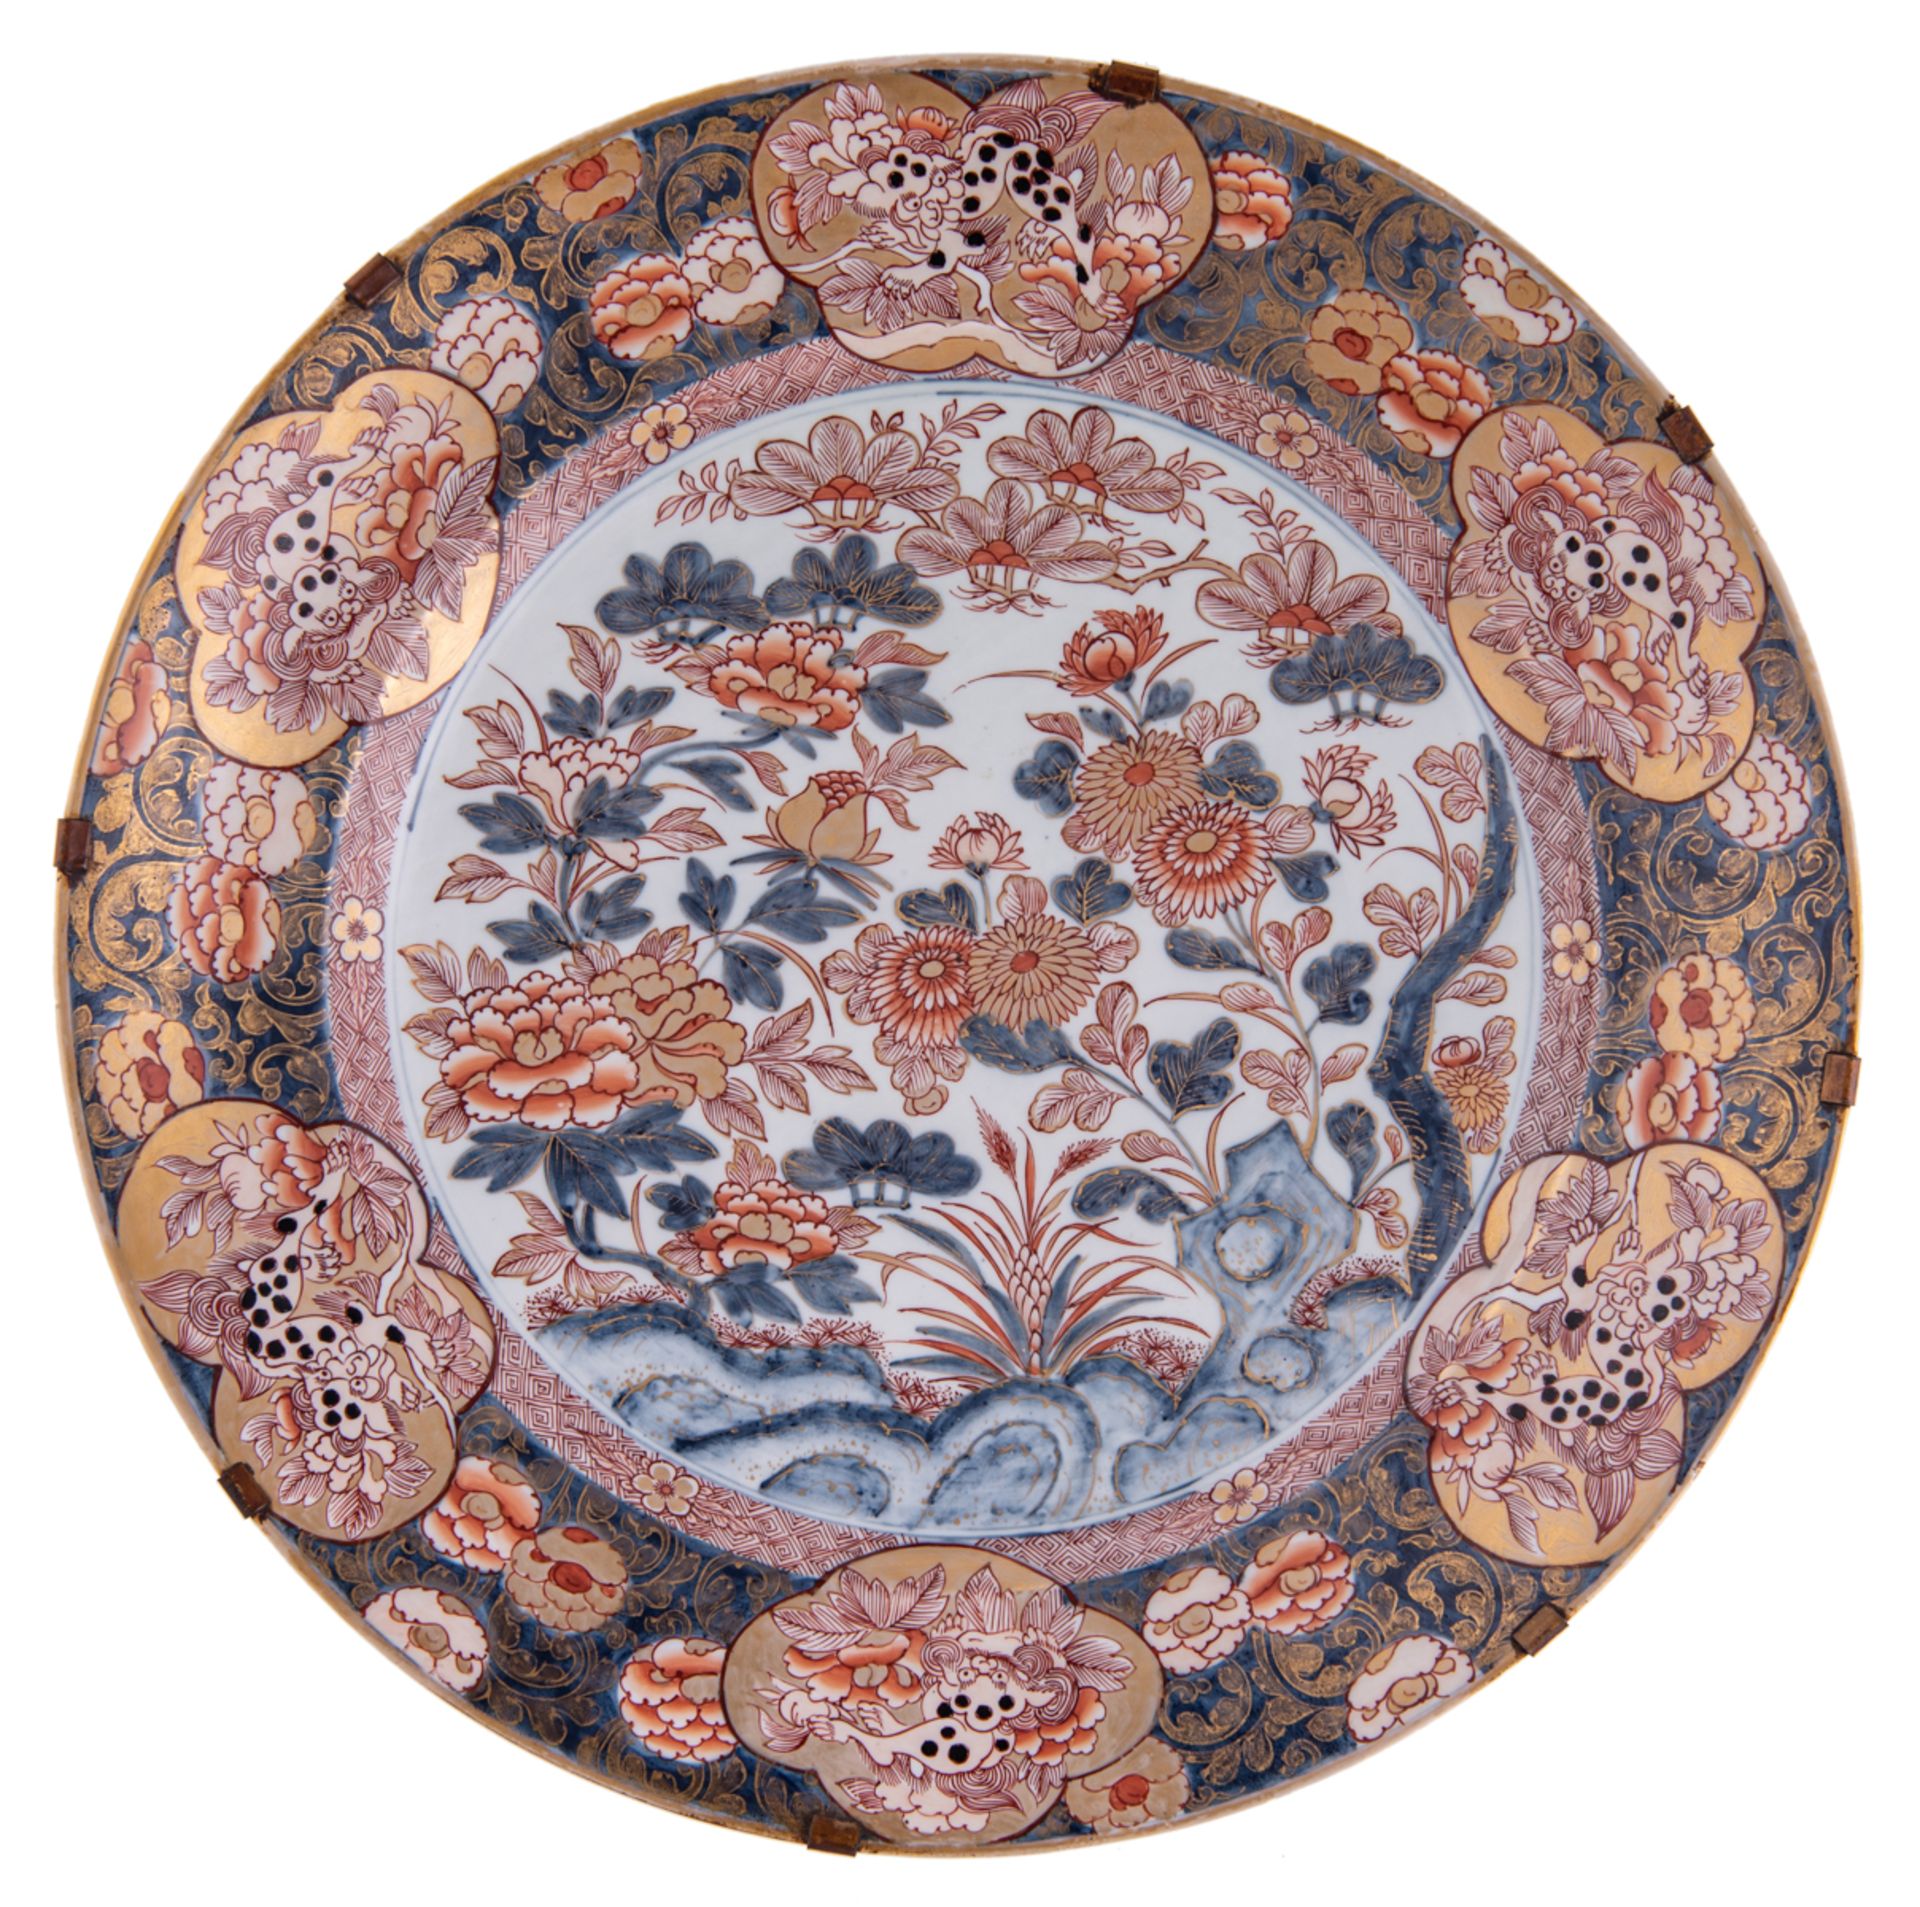 A large Edo period Japanese Imari plate, the central panel decorated with flowers, the roundels with